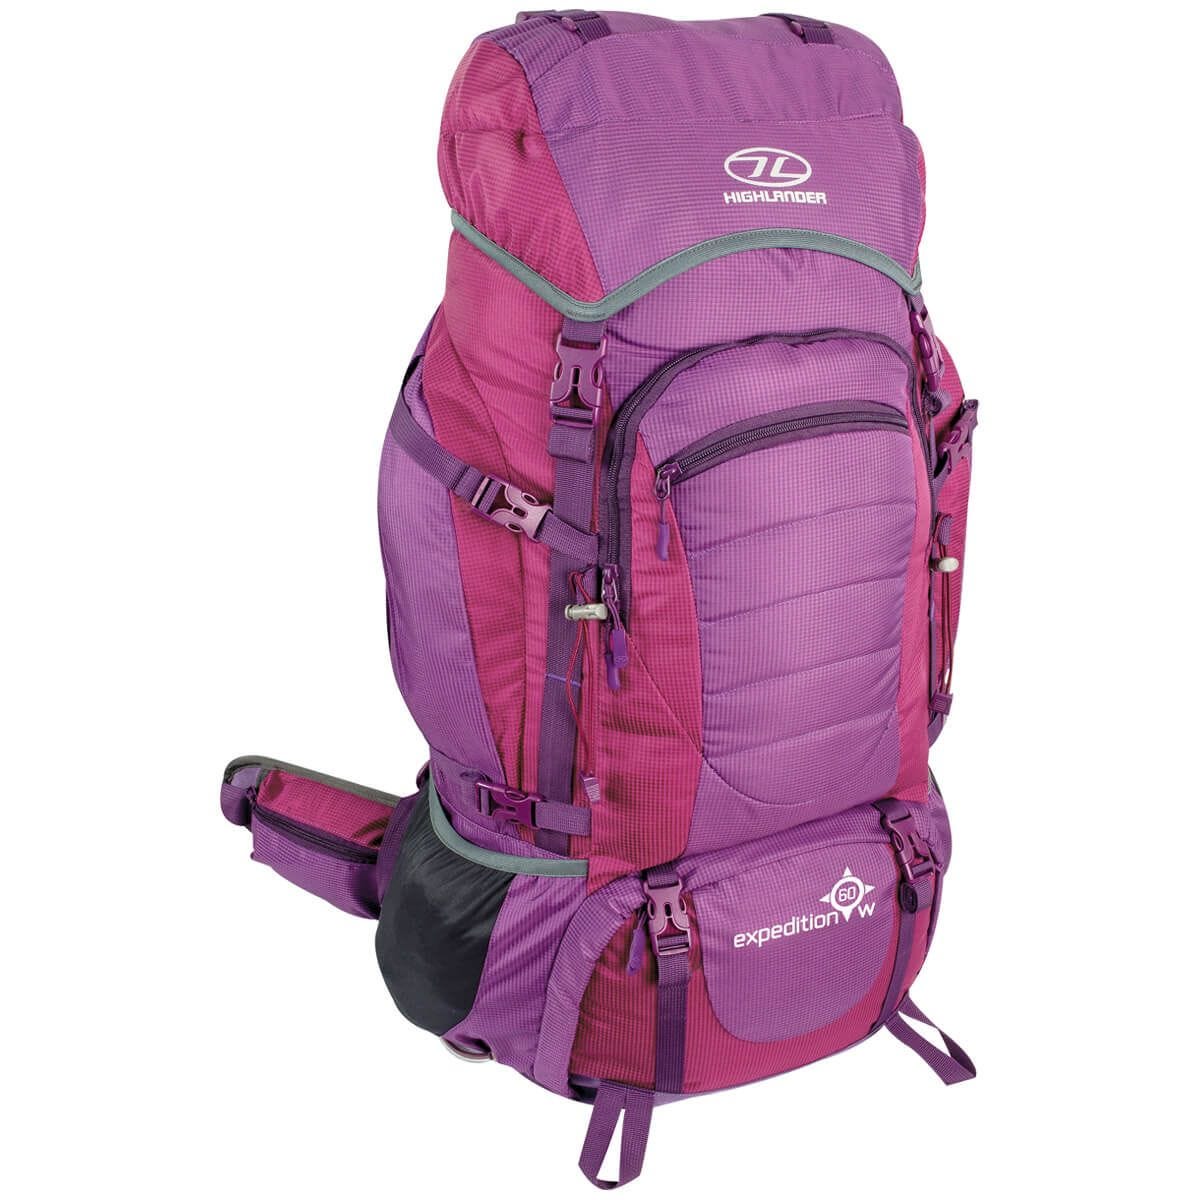 The Highlander Expedition 60W Rucksack travel product recommended by Lukas on Lifney.